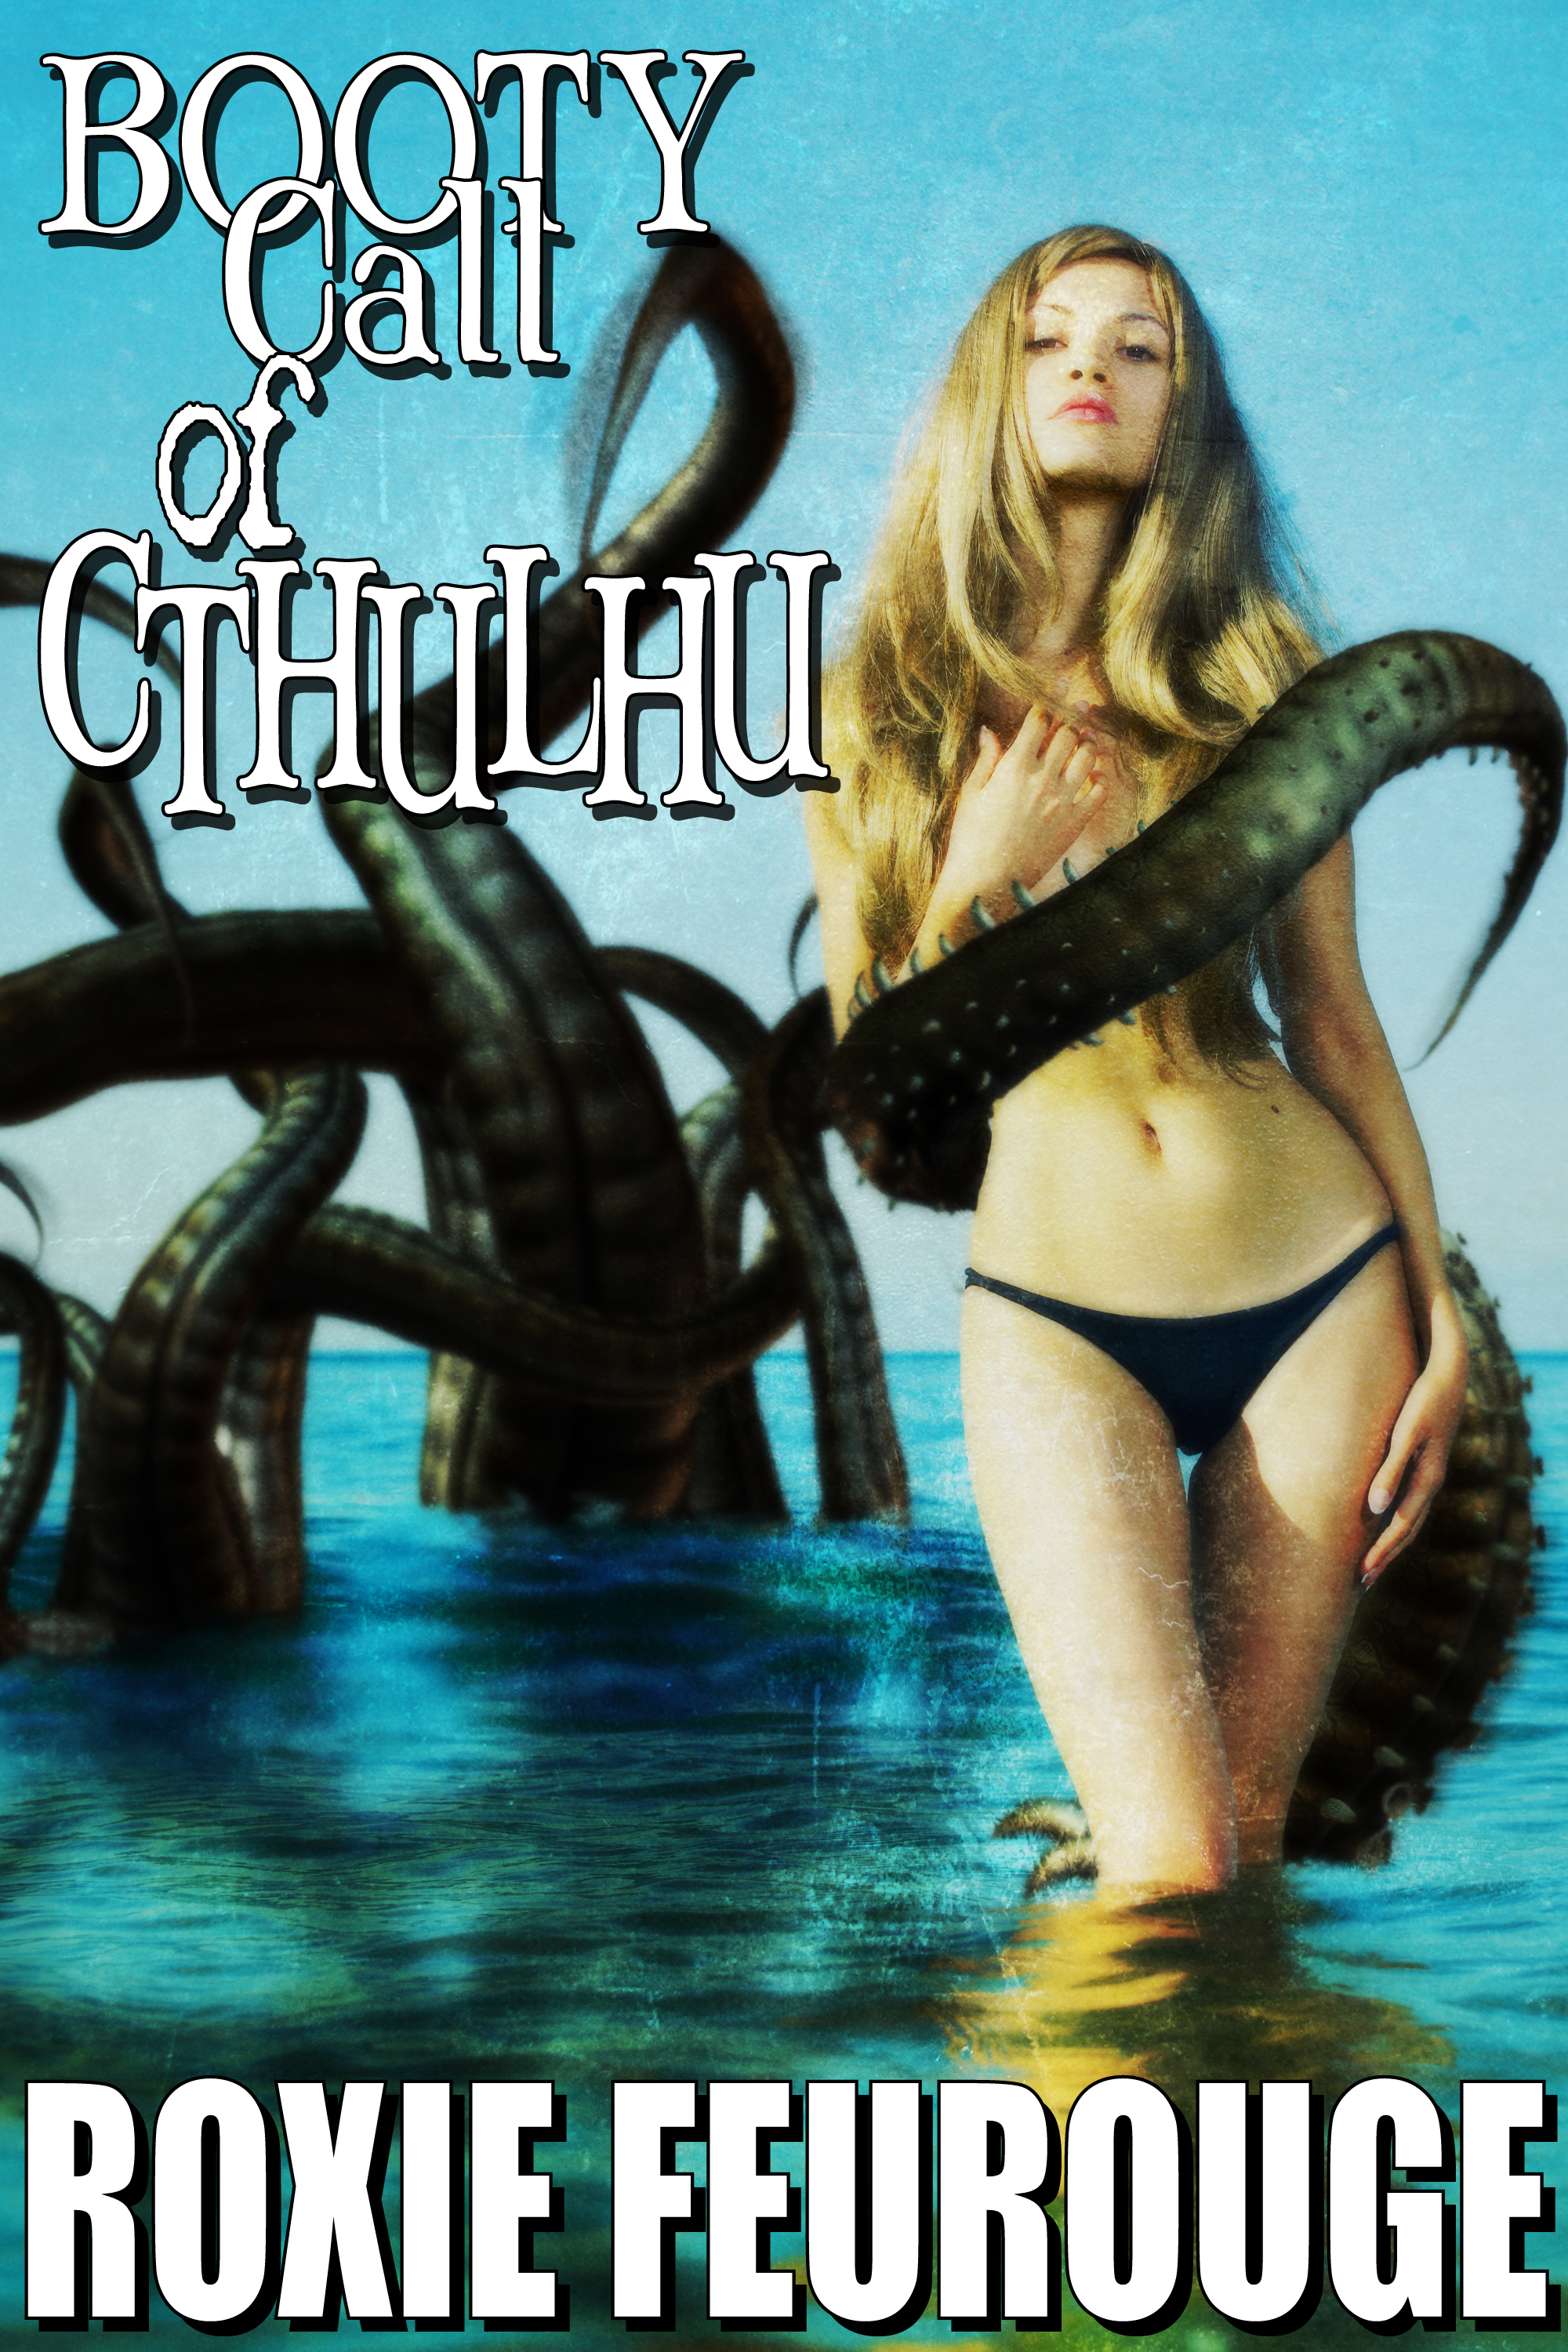 Smashwords â€“ Booty Call of Cthulhu (Tentacle monster porn) â€“ a book by  Roxie Feurouge